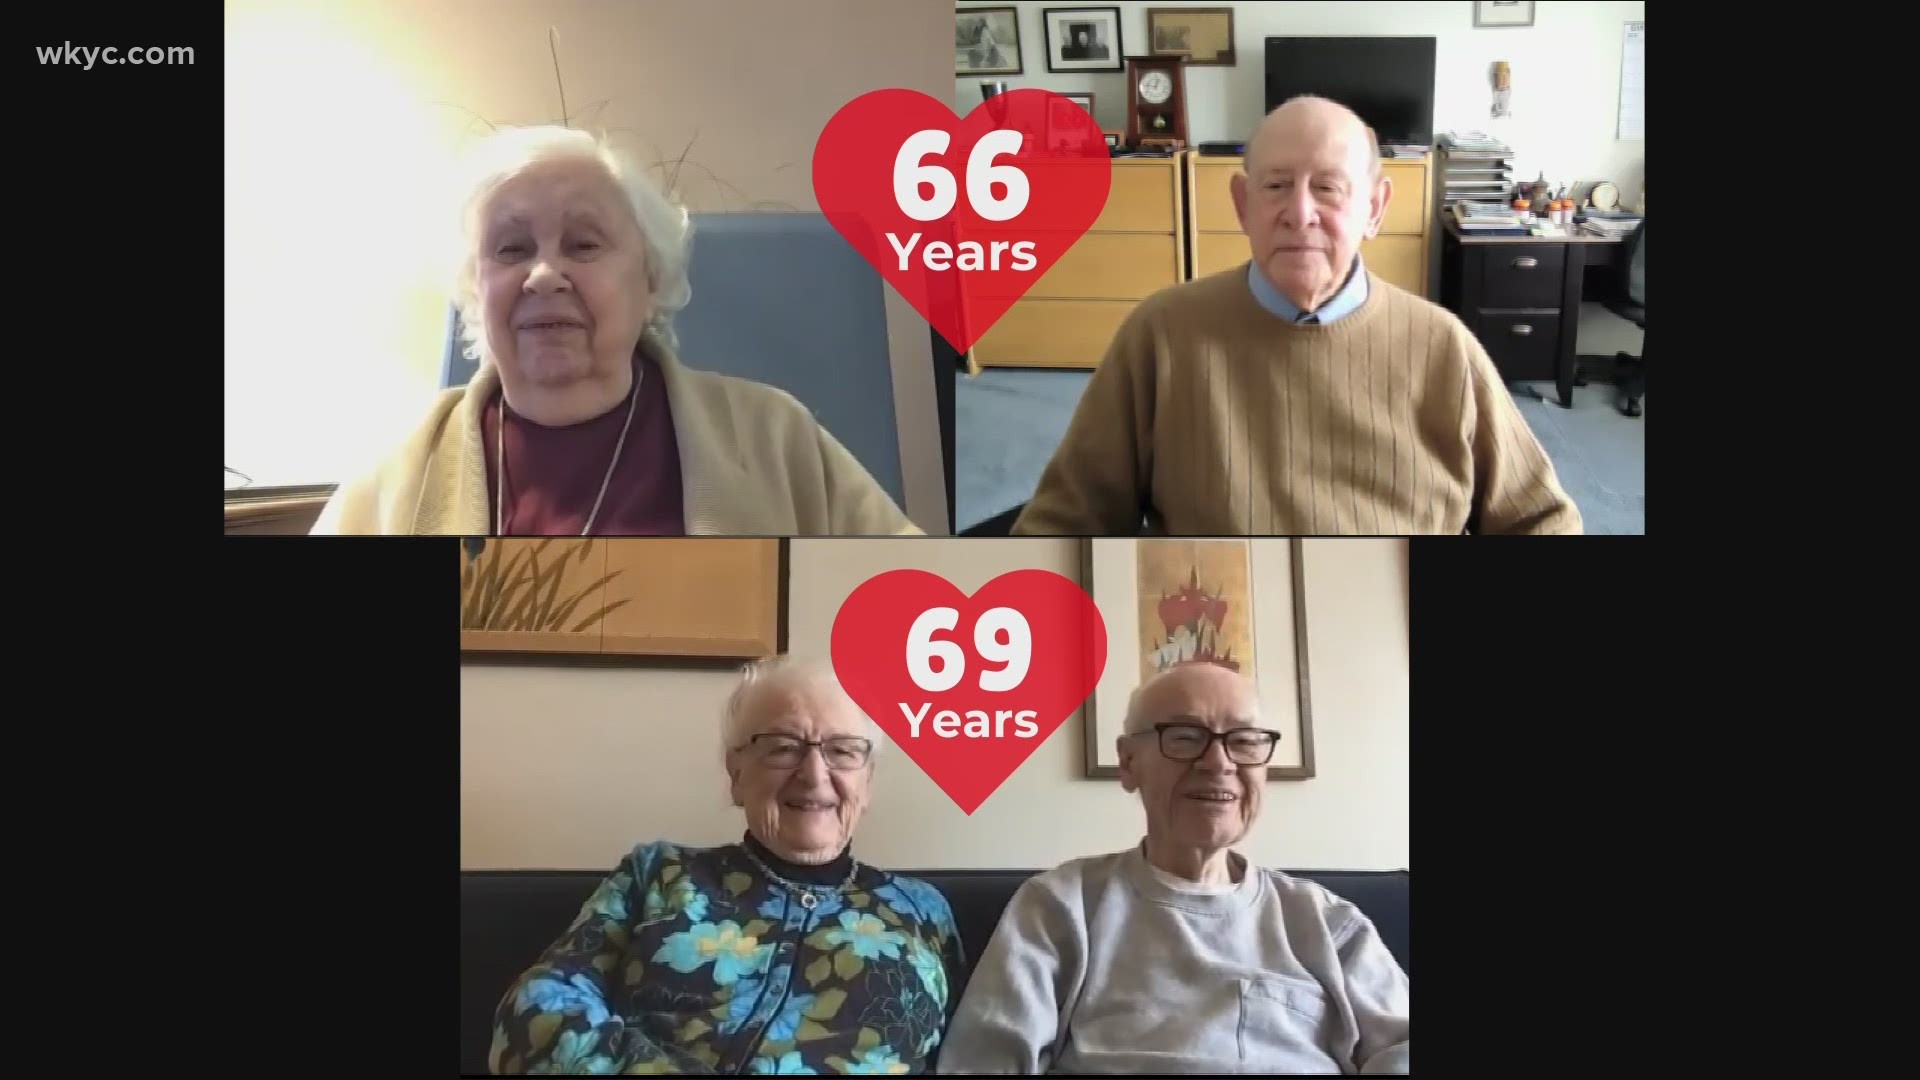 Feb. 11, 2021: Do you know what true love looks like? Here are two examples from a pair of Northeast Ohio couples who have been married for nearly seven decades.